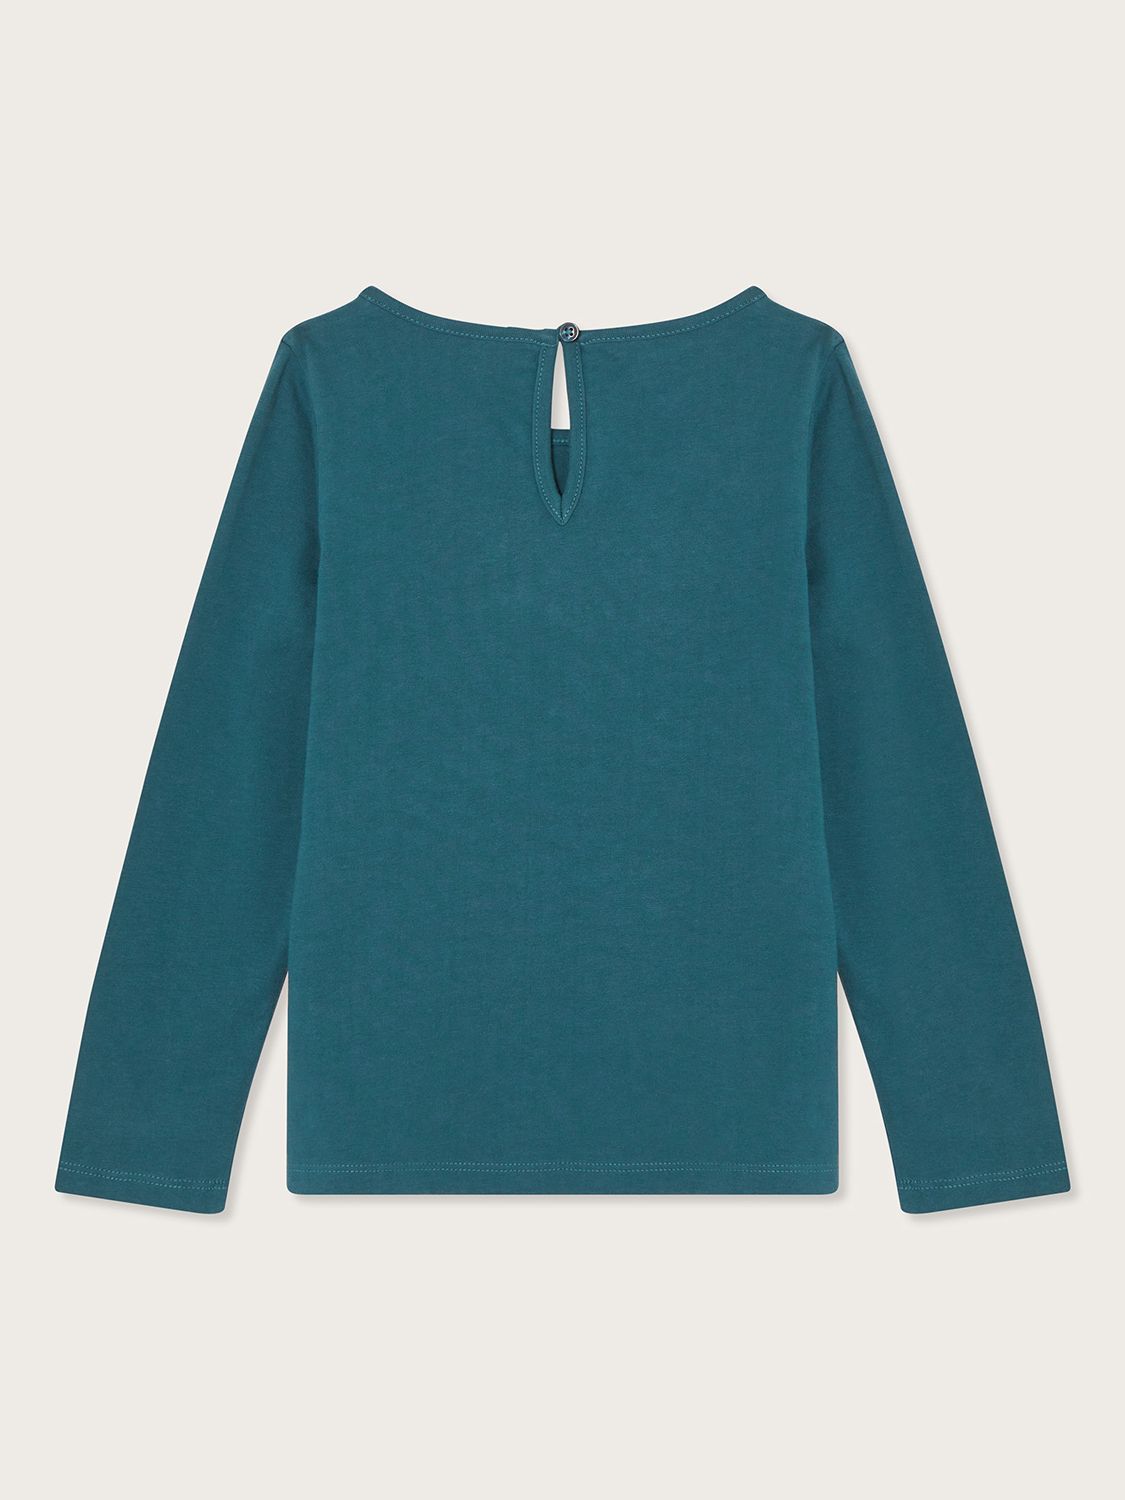 Monsoon Kids' Floral Embroidered Beaded Long Sleeve T-Shirt, Teal, 3-4 ...